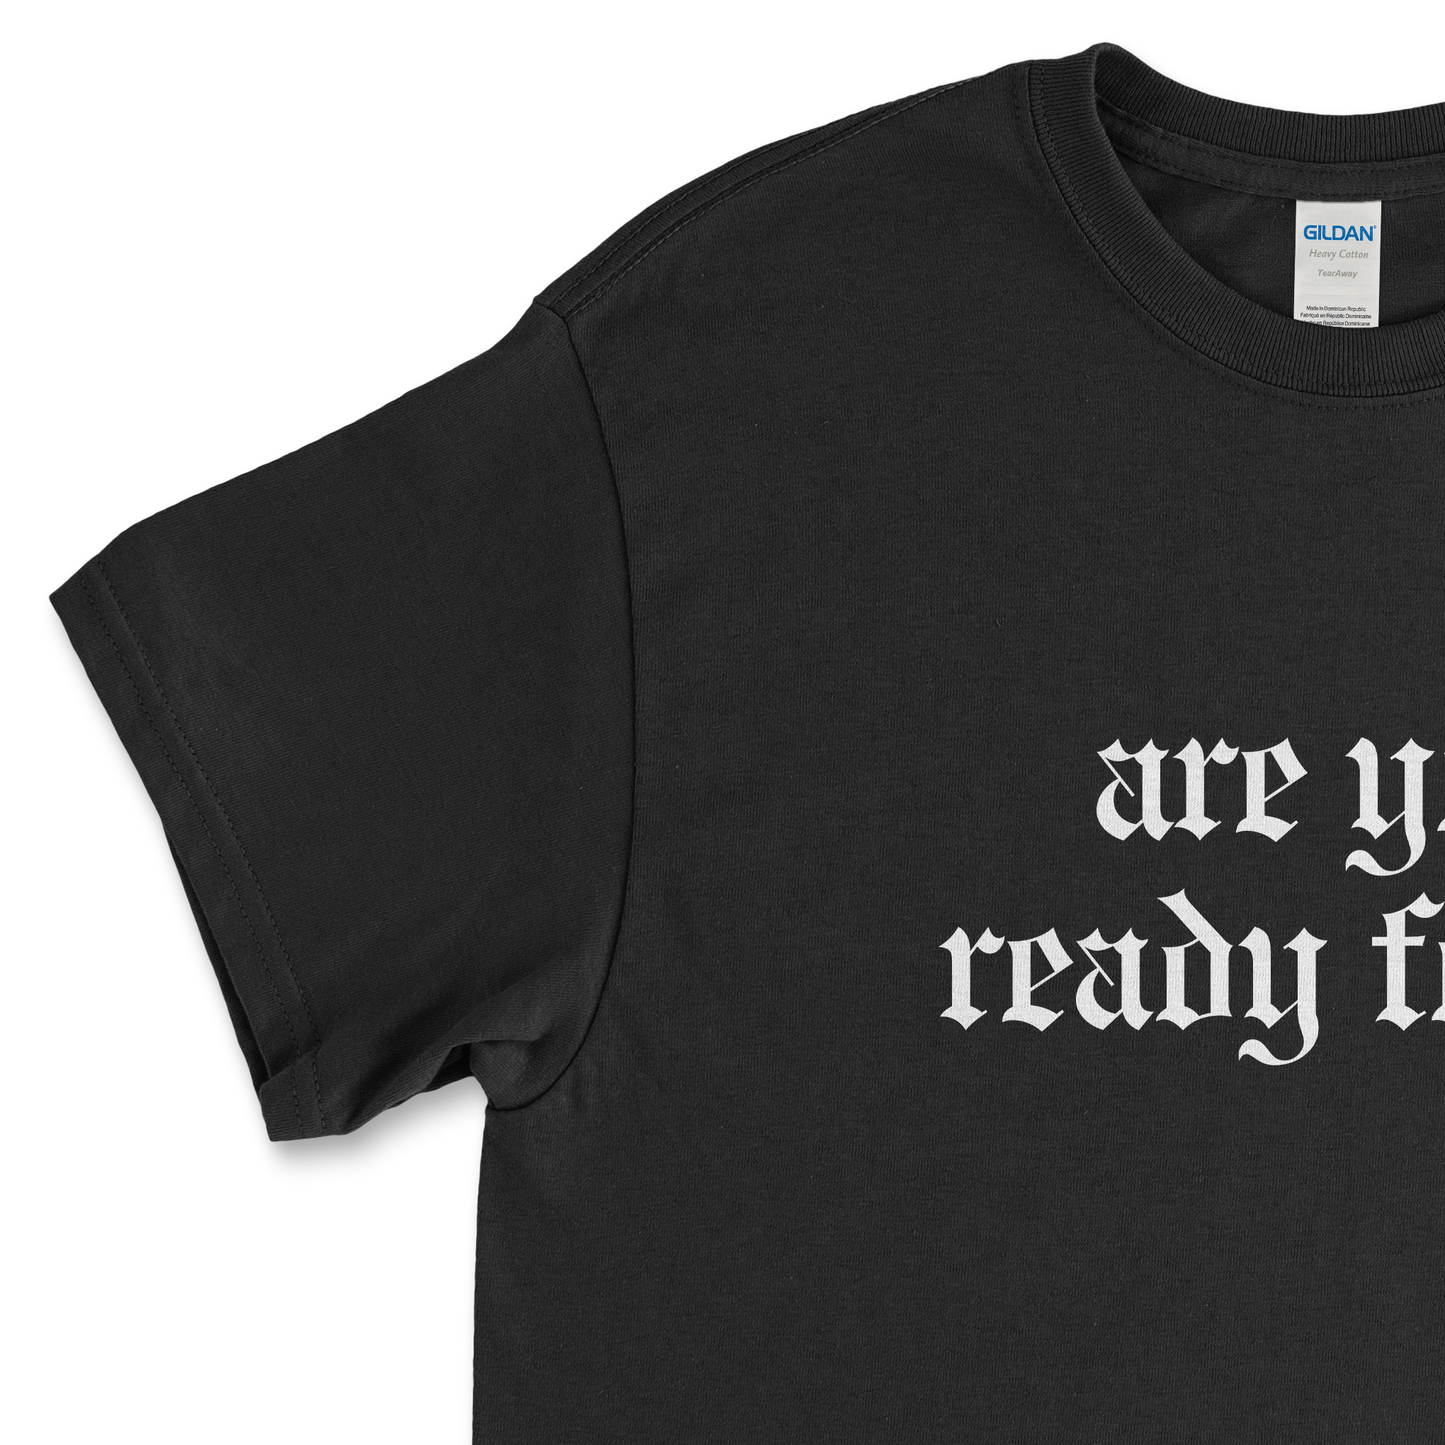 Are You Ready For it Reputation T-Shirt